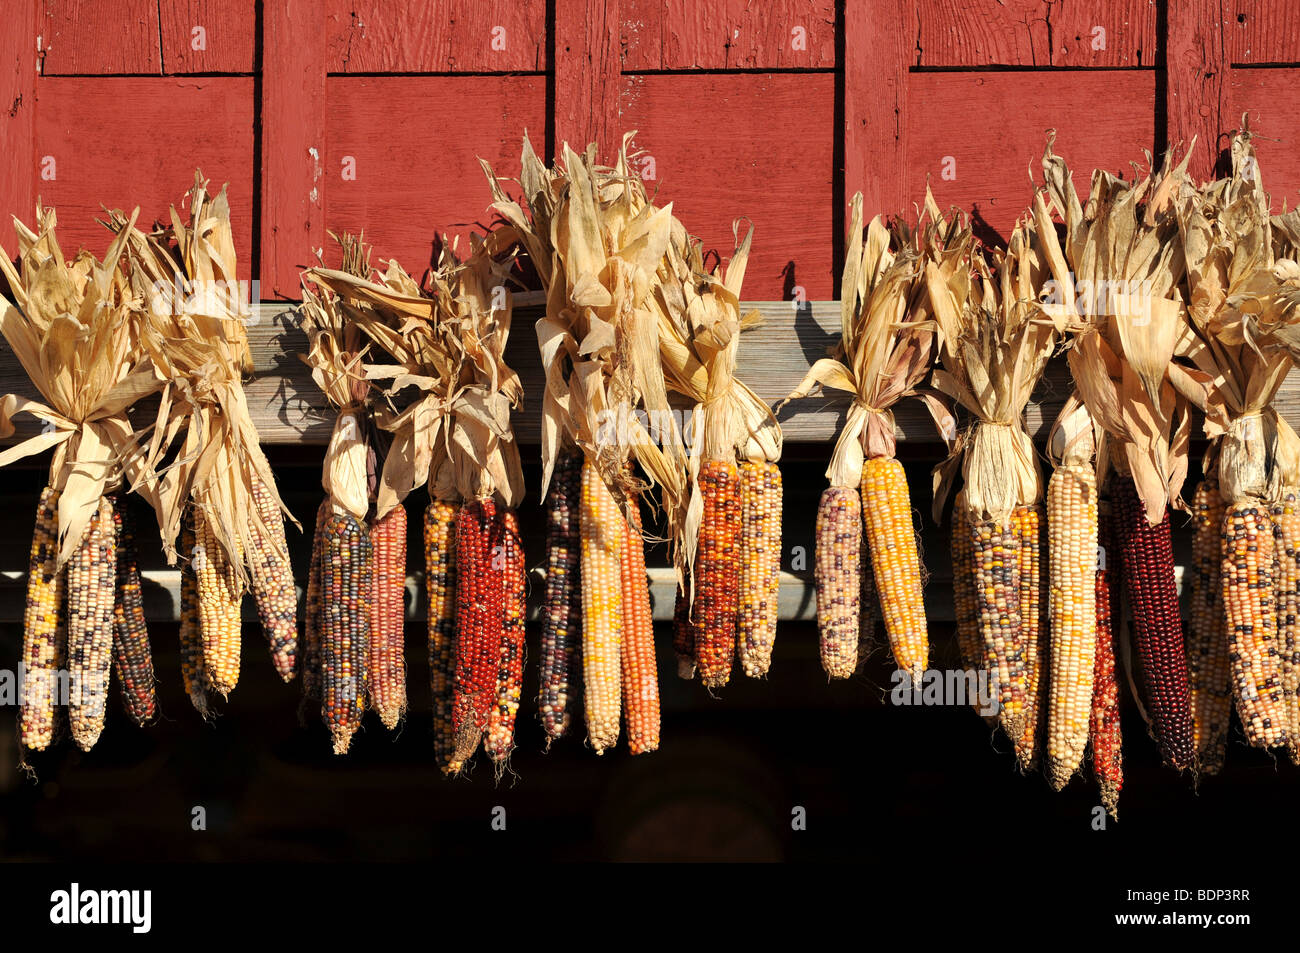 Indian Corn Husks on the side of a barn Stock Photo